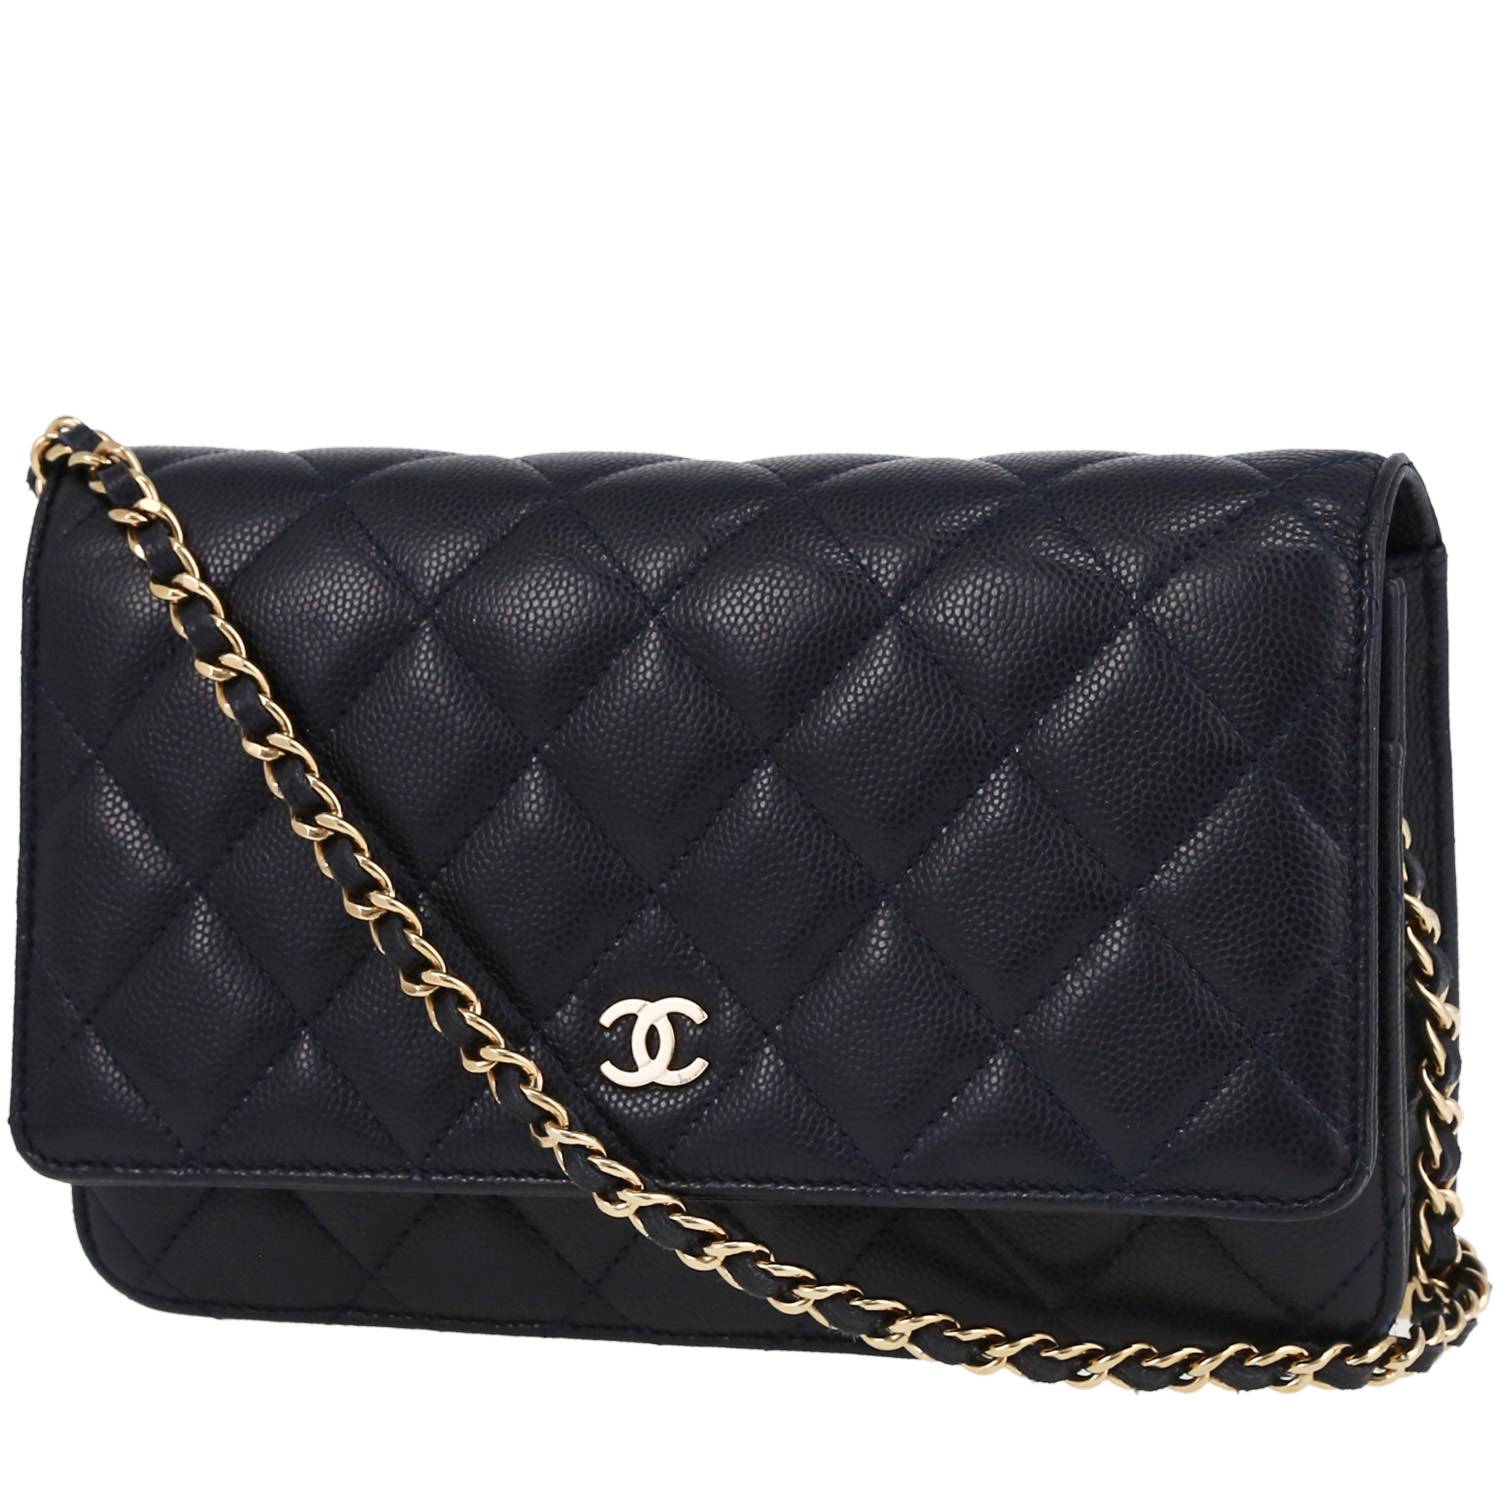 Handbags Chanel Chanel Boy Chain Shoulder Bag Navy Quilted Flap Caviar Grained